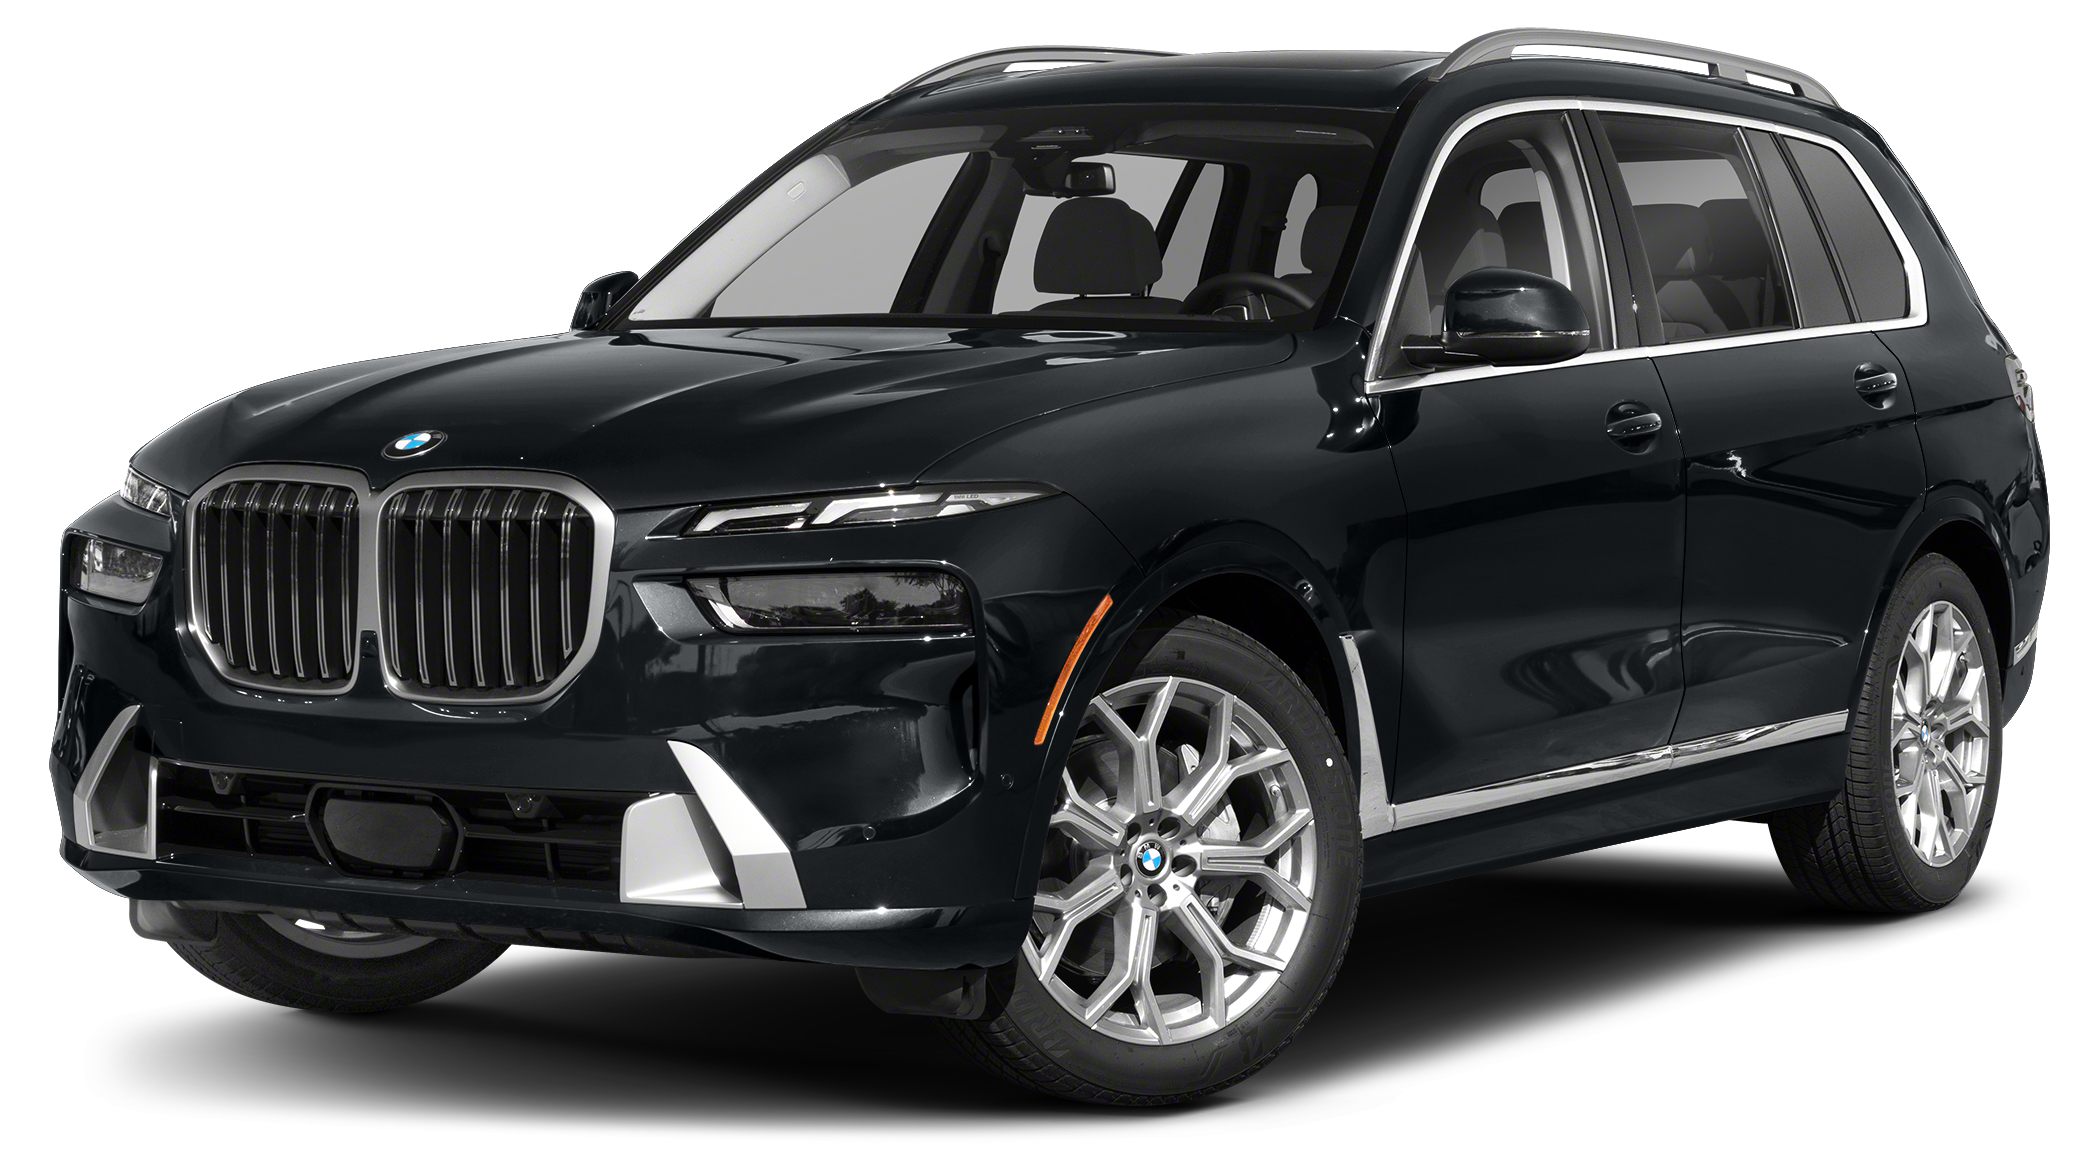 2023 BMW X7 SUV facelift video review: design, powertrain, features -  Introduction